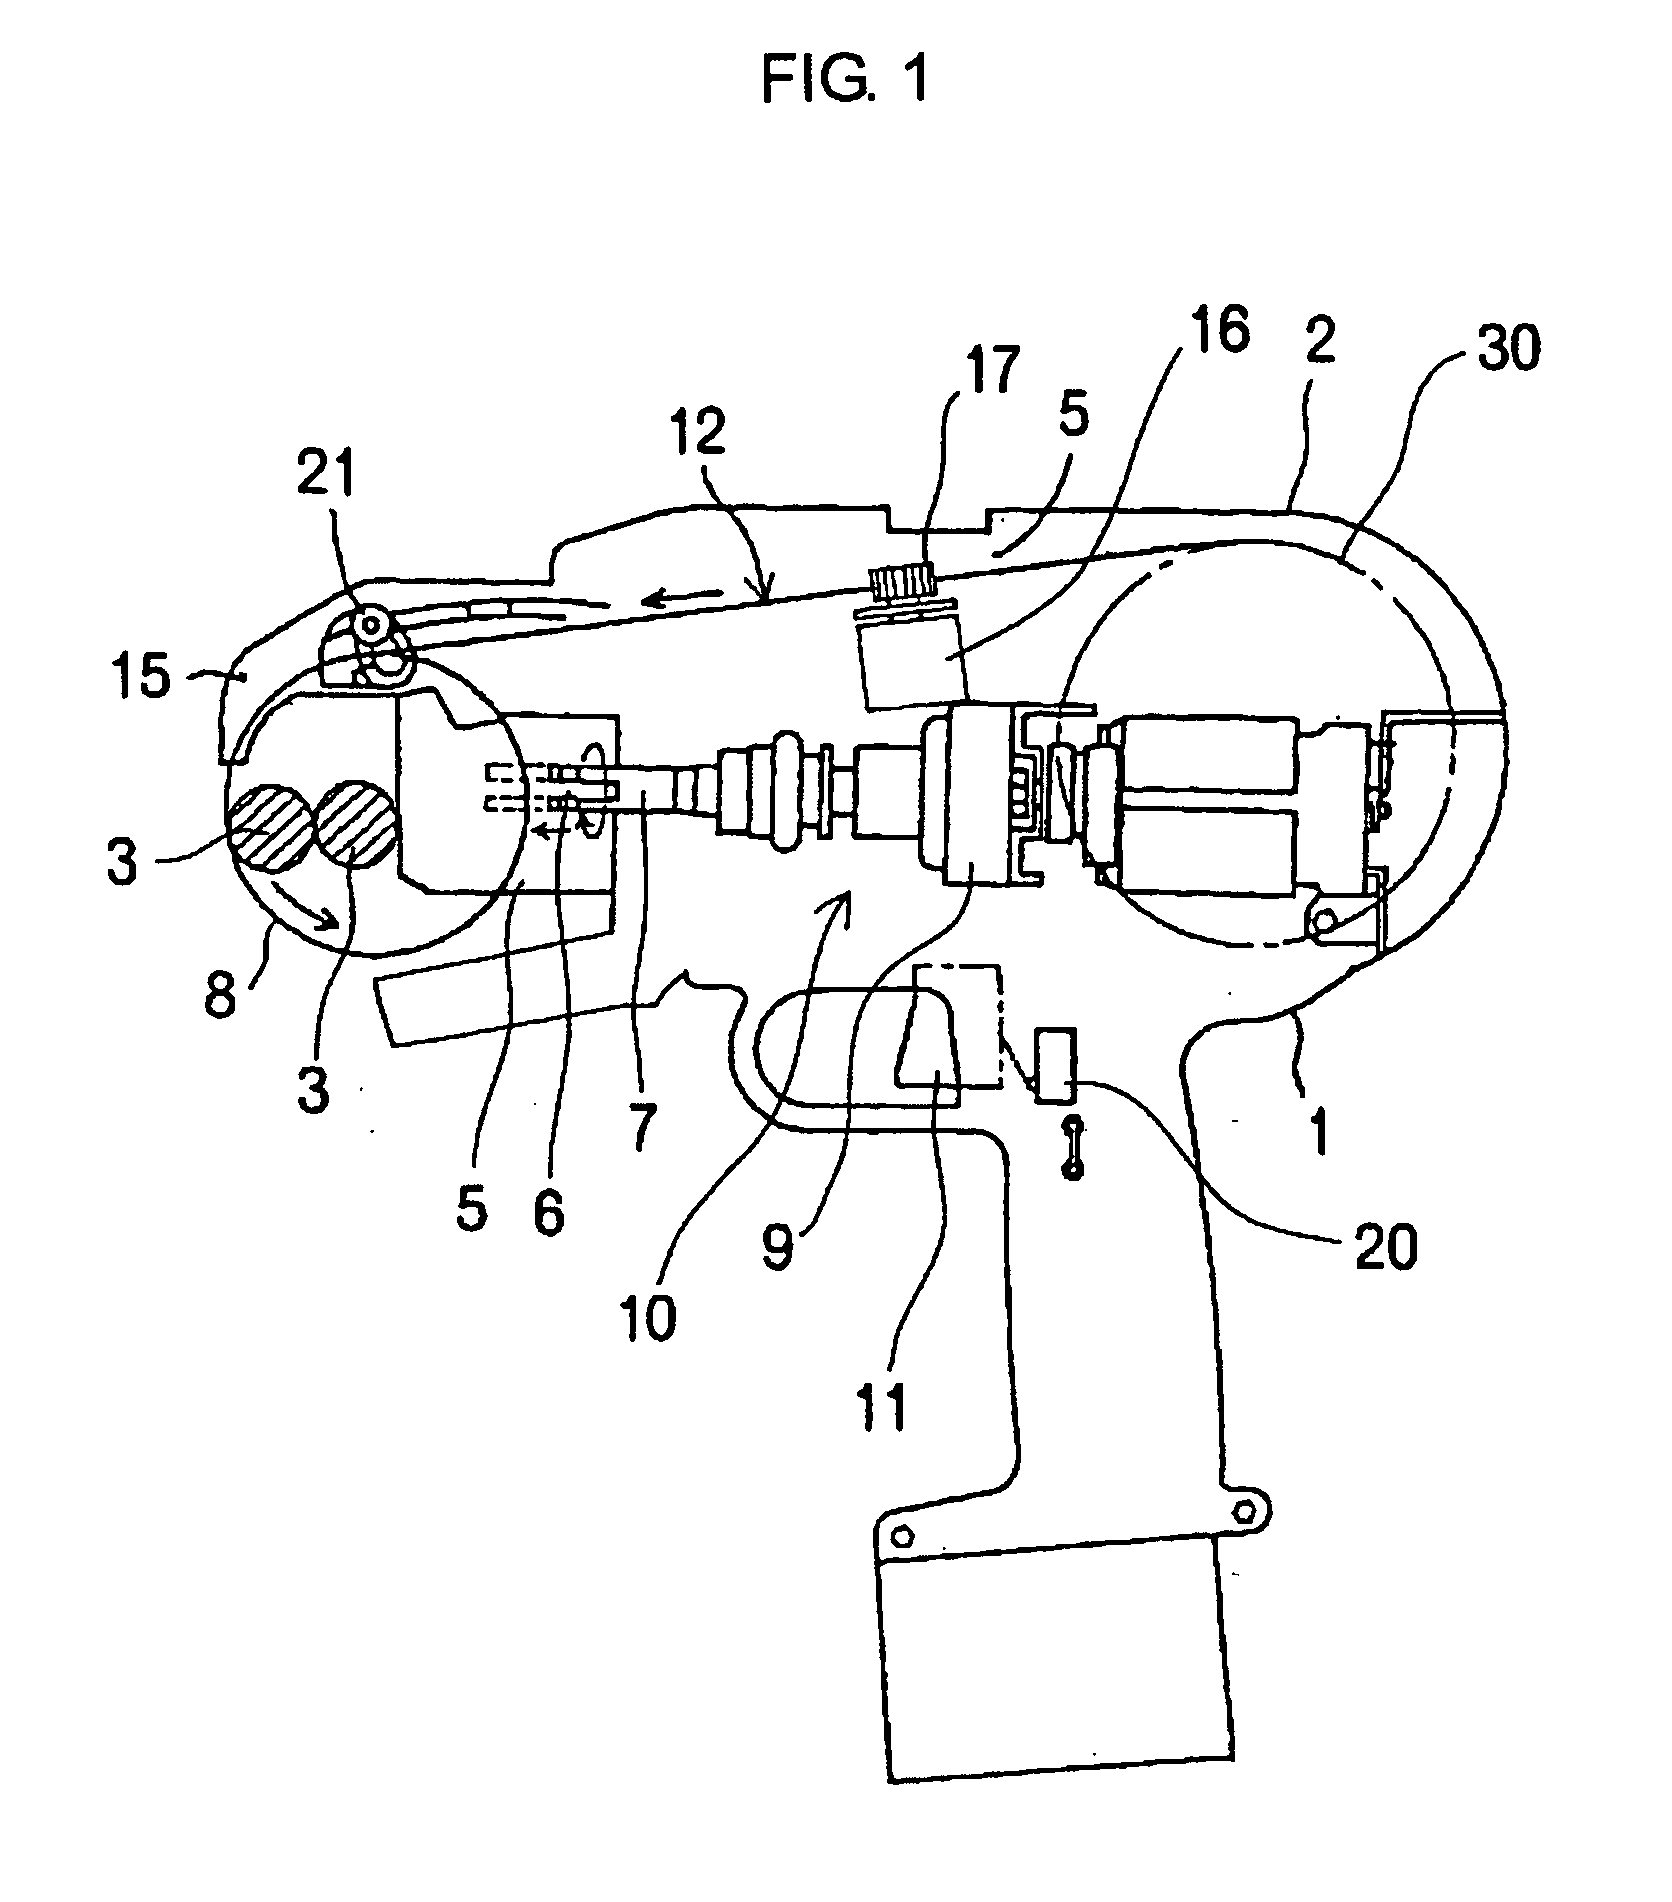 Reinforcing bar binder, wire reel and method for identifying wire reel